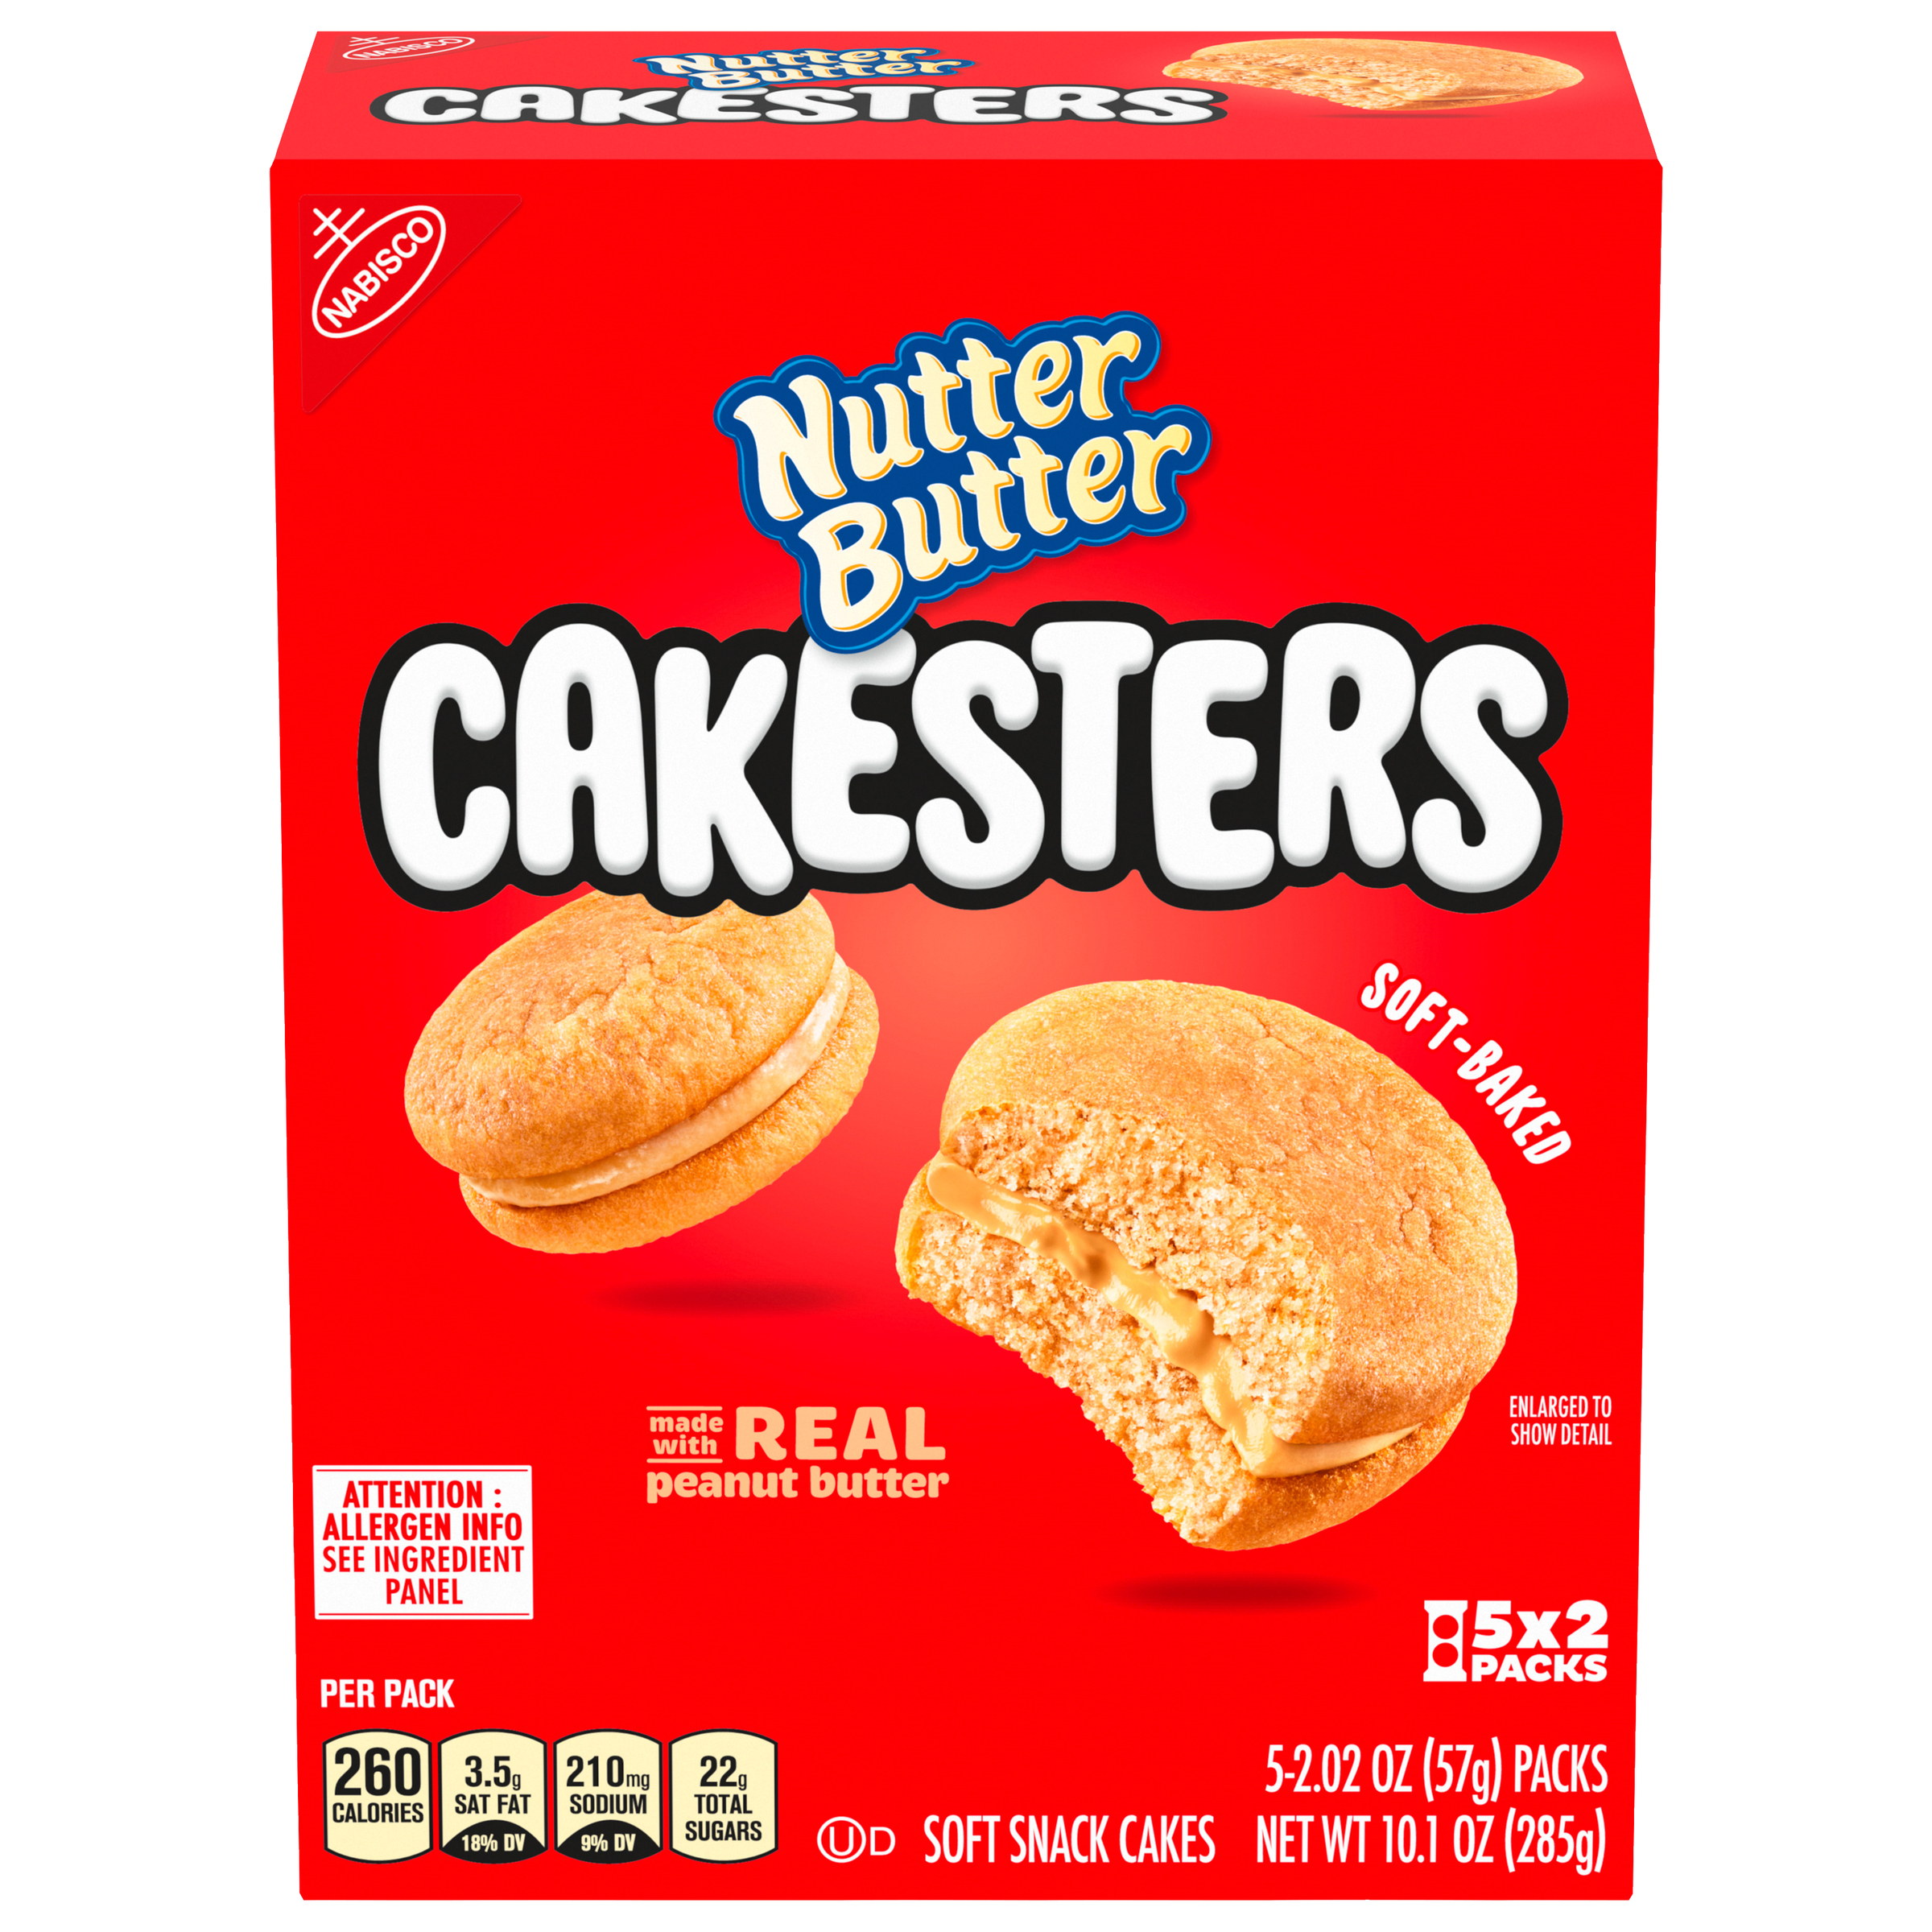 NUTTER BUTTER Cakesters Cookies 0.63 LB